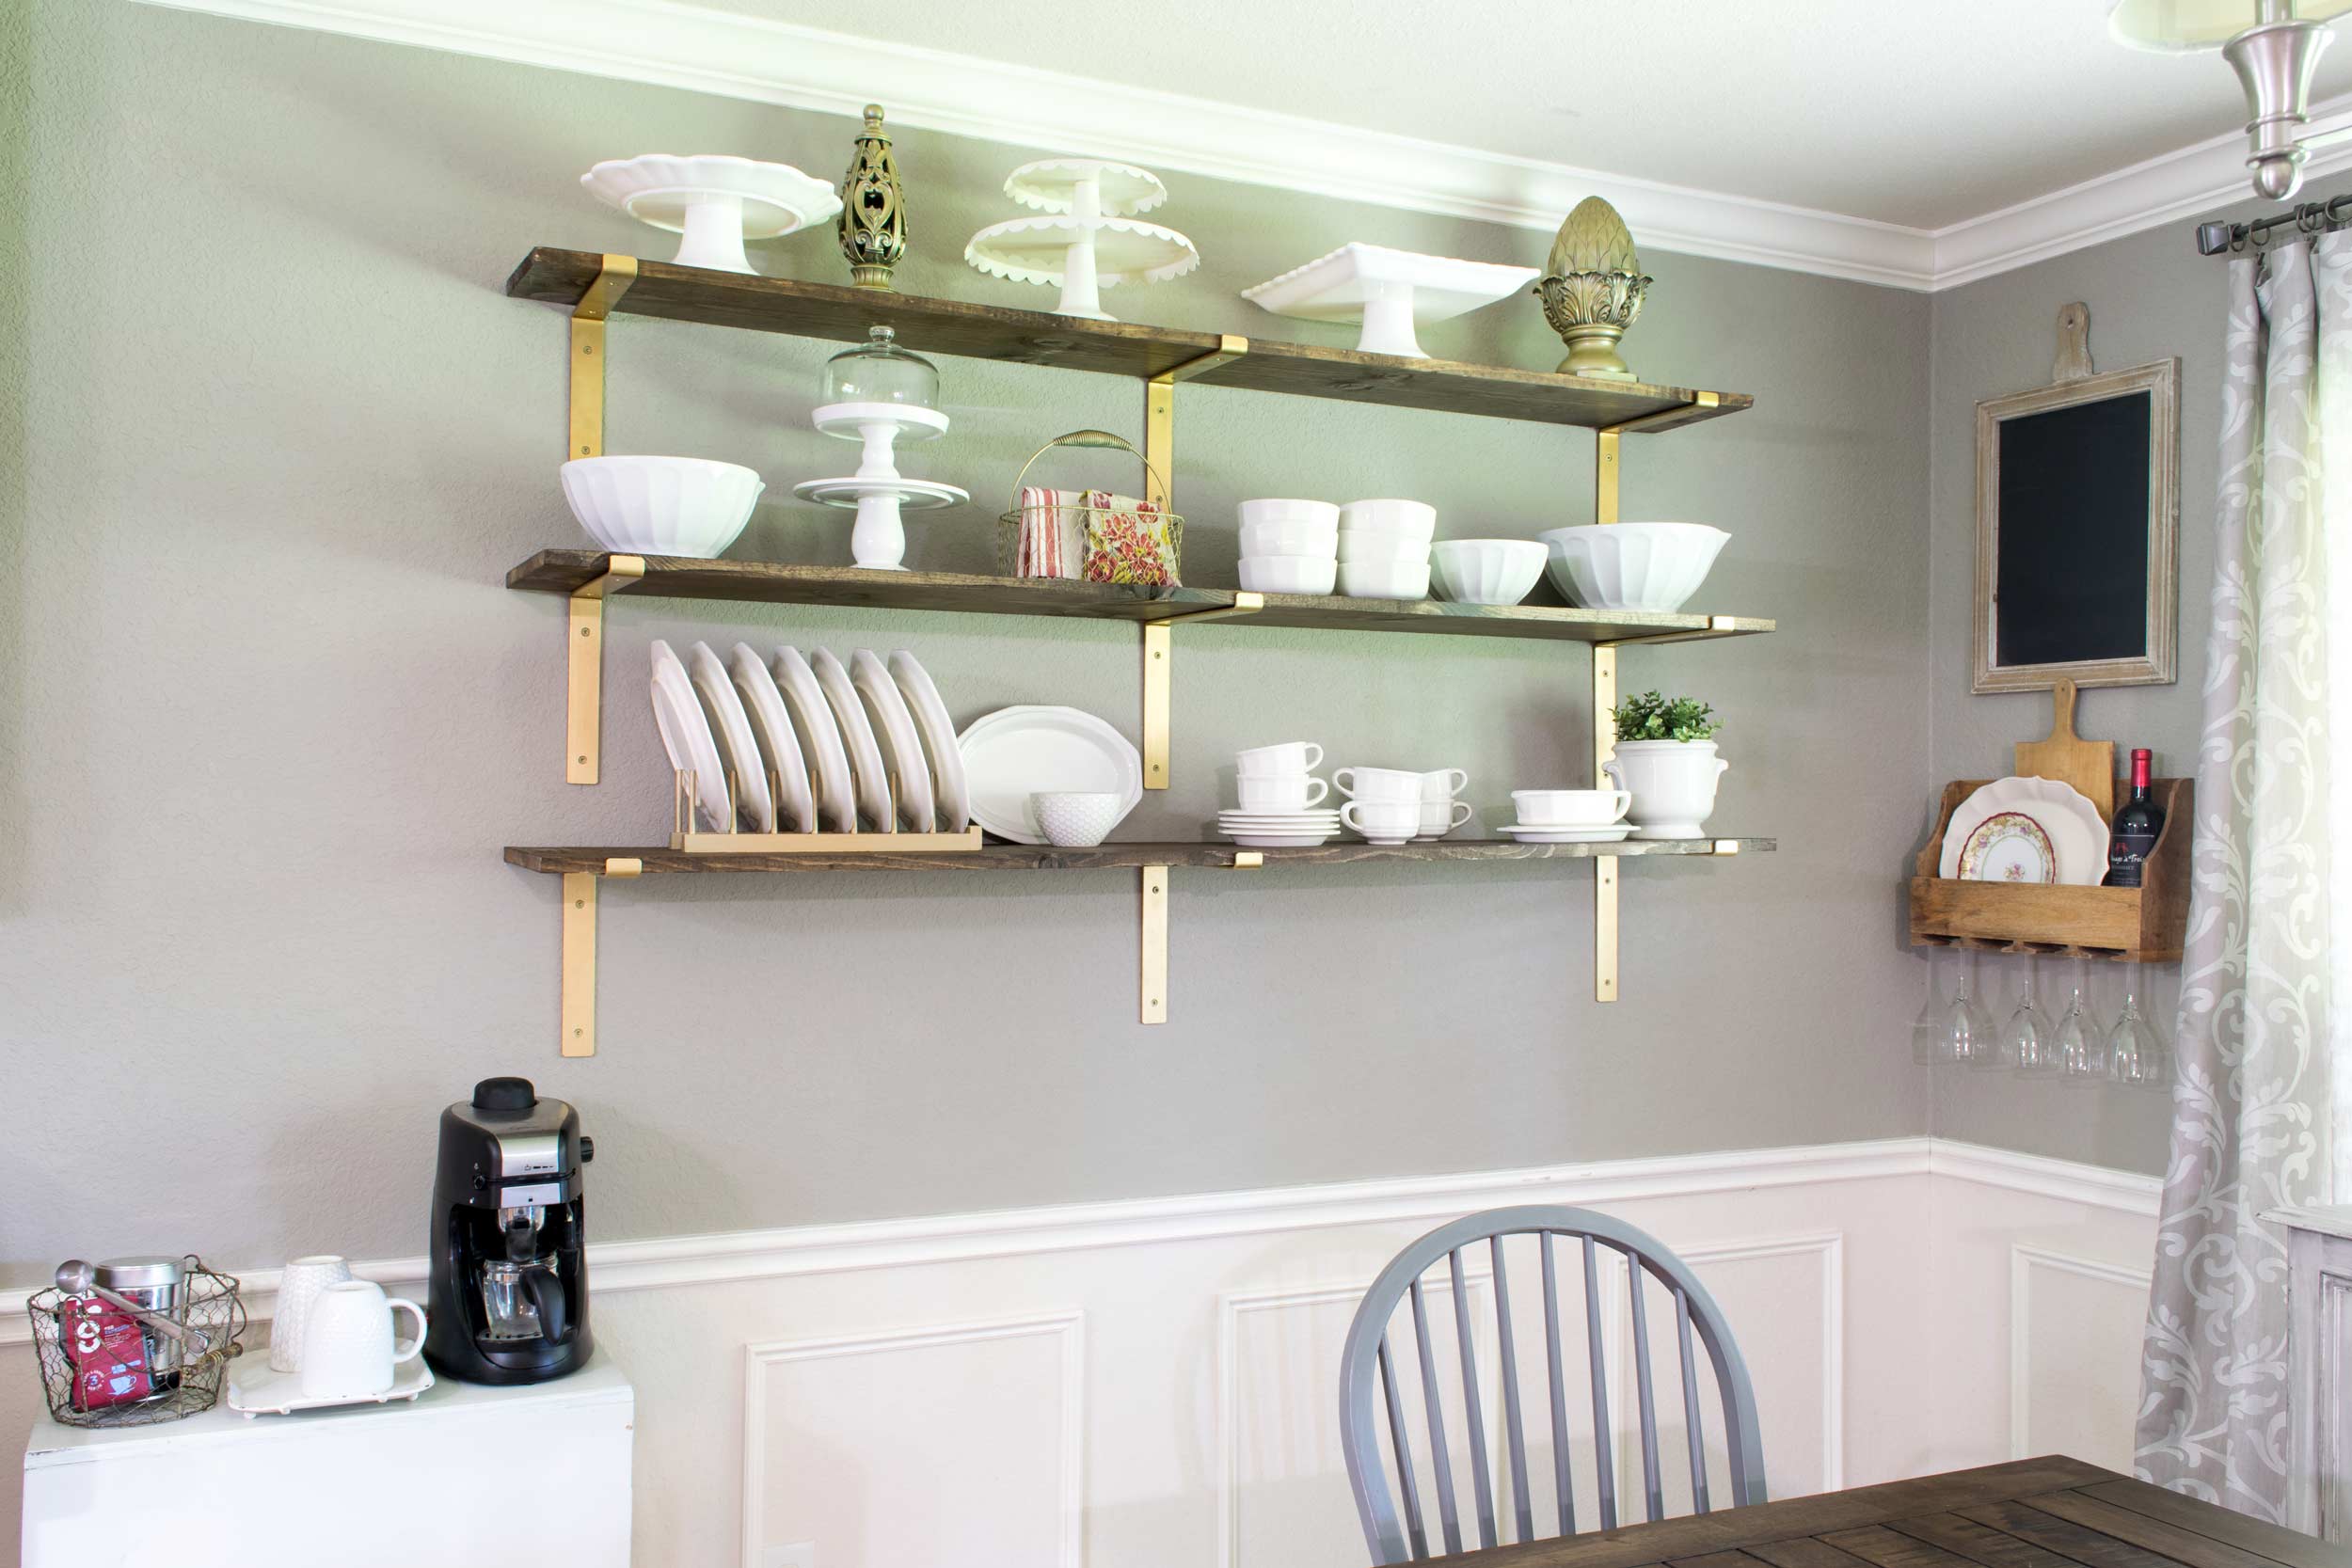 Dining Room Shelves To.Display Dishes